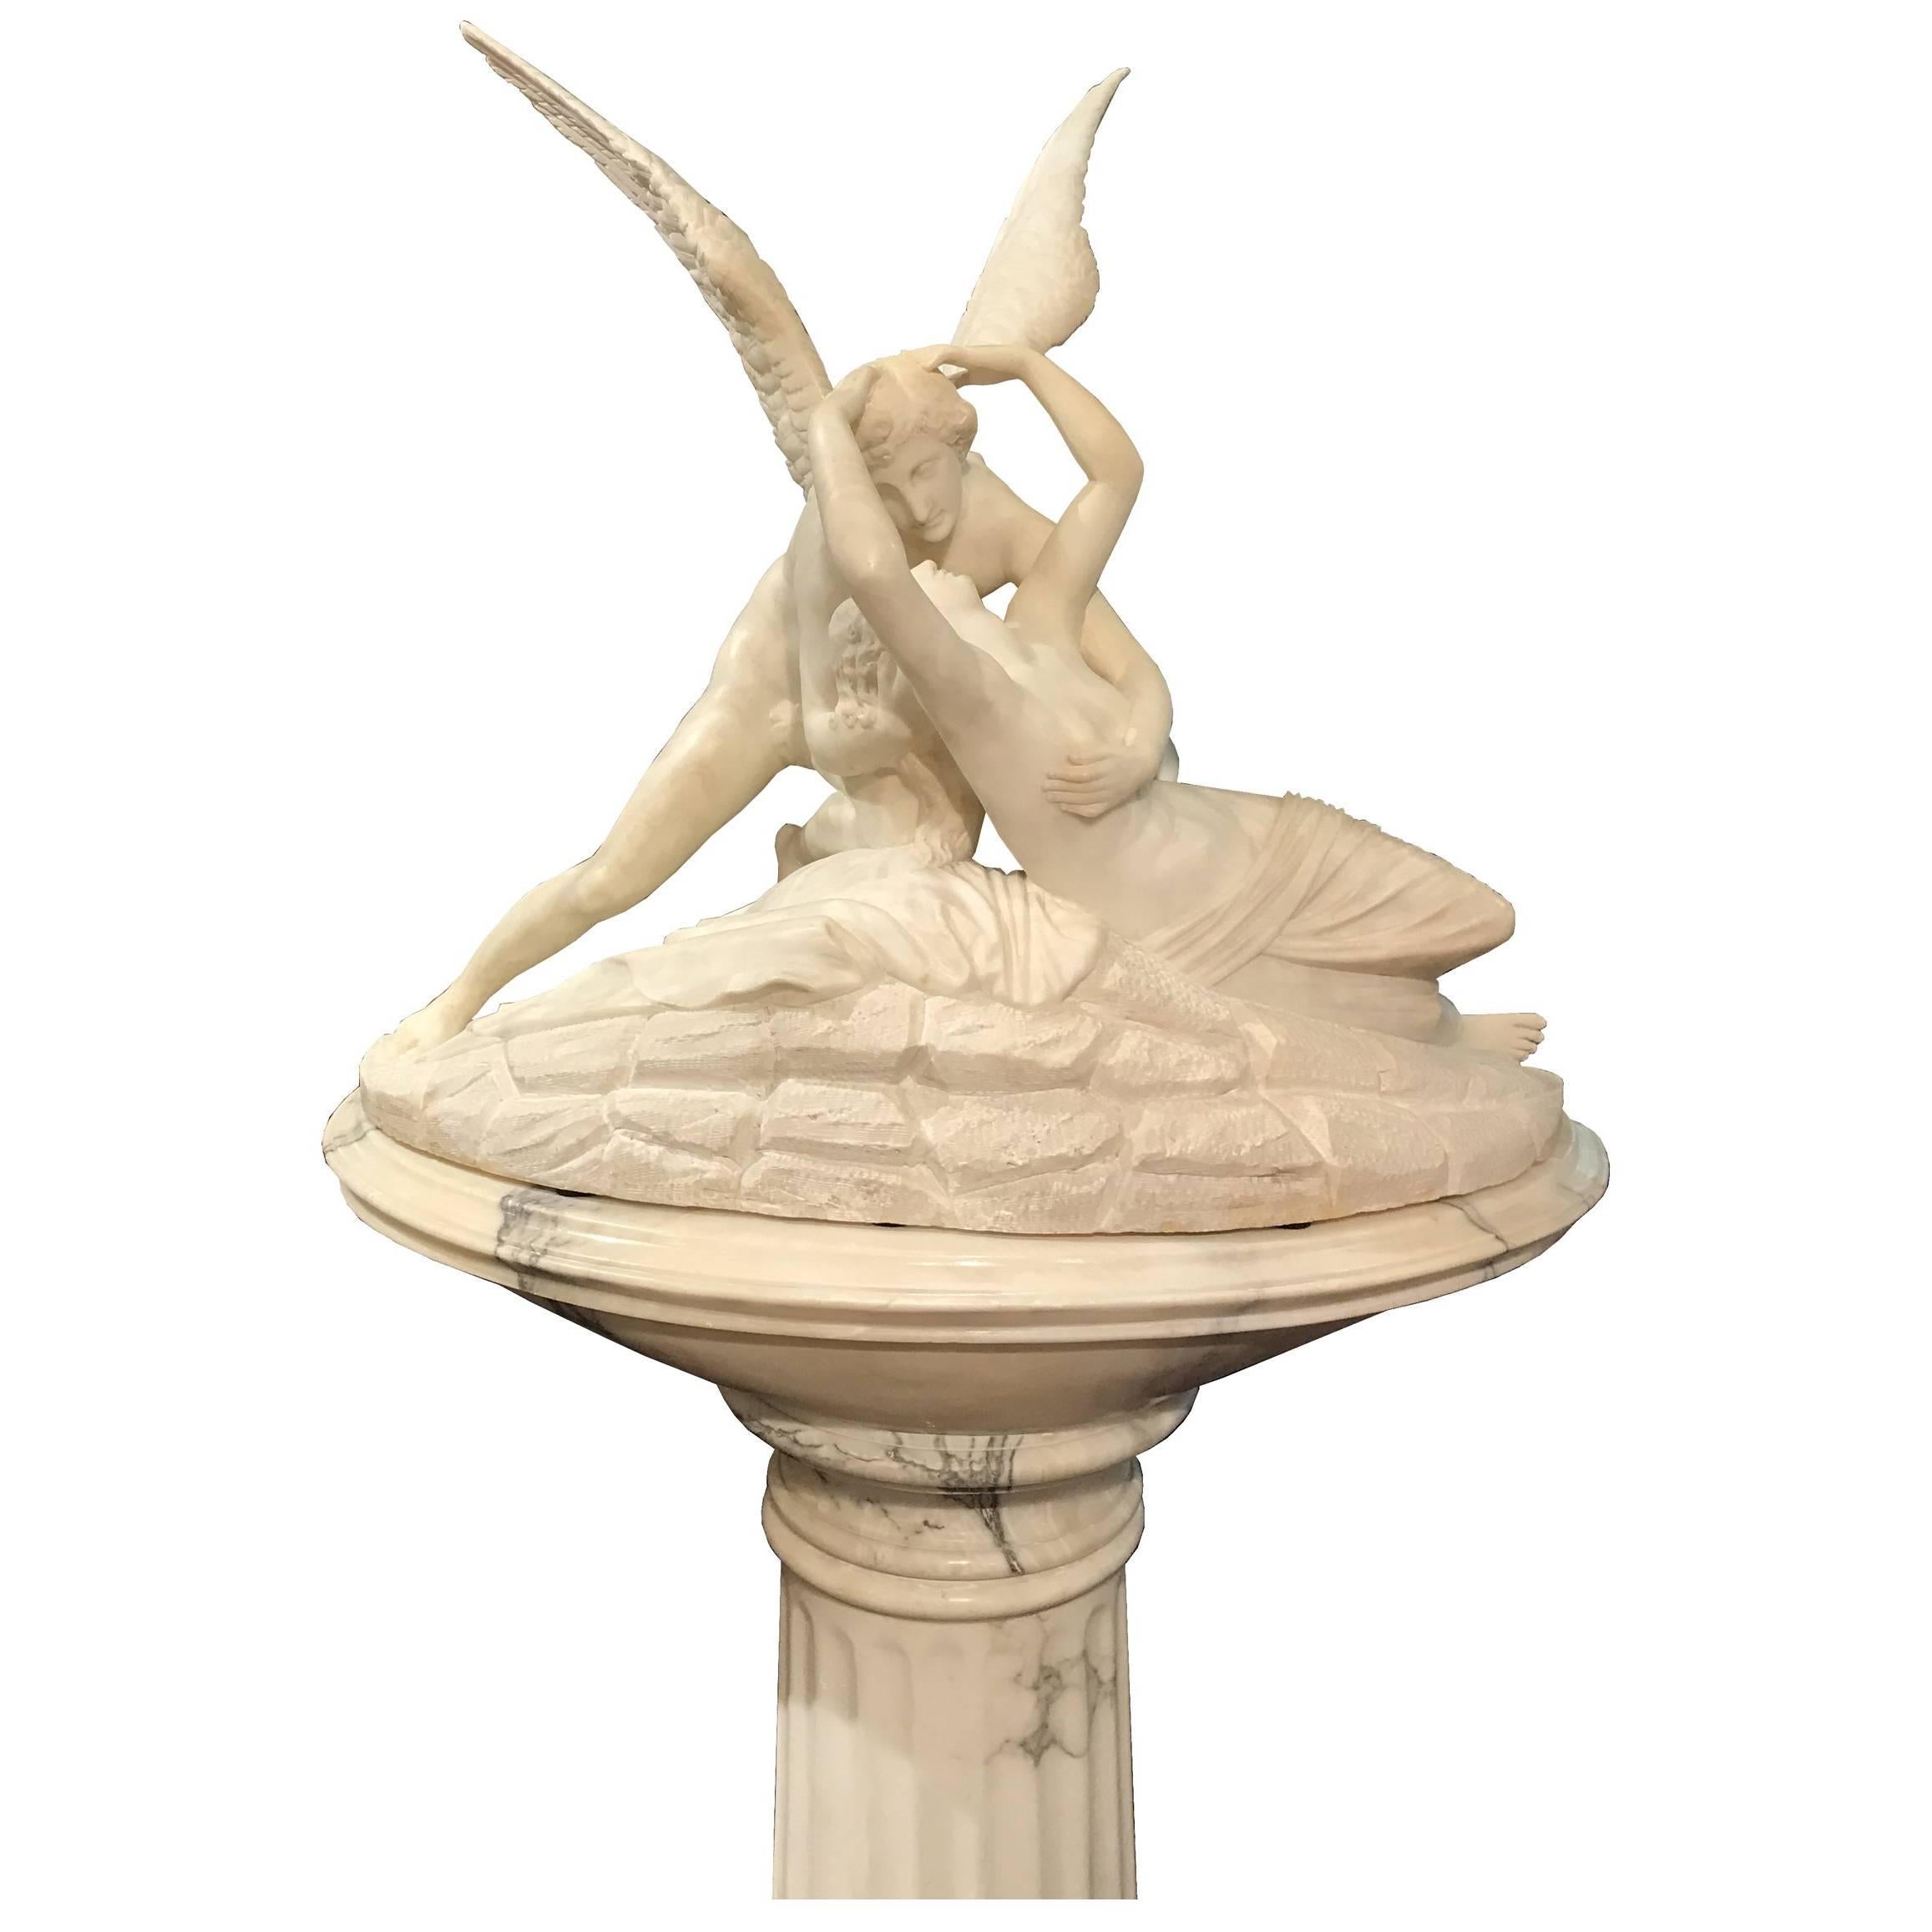 Psyche Revived by Cupid's Kiss on Pedestal For Sale